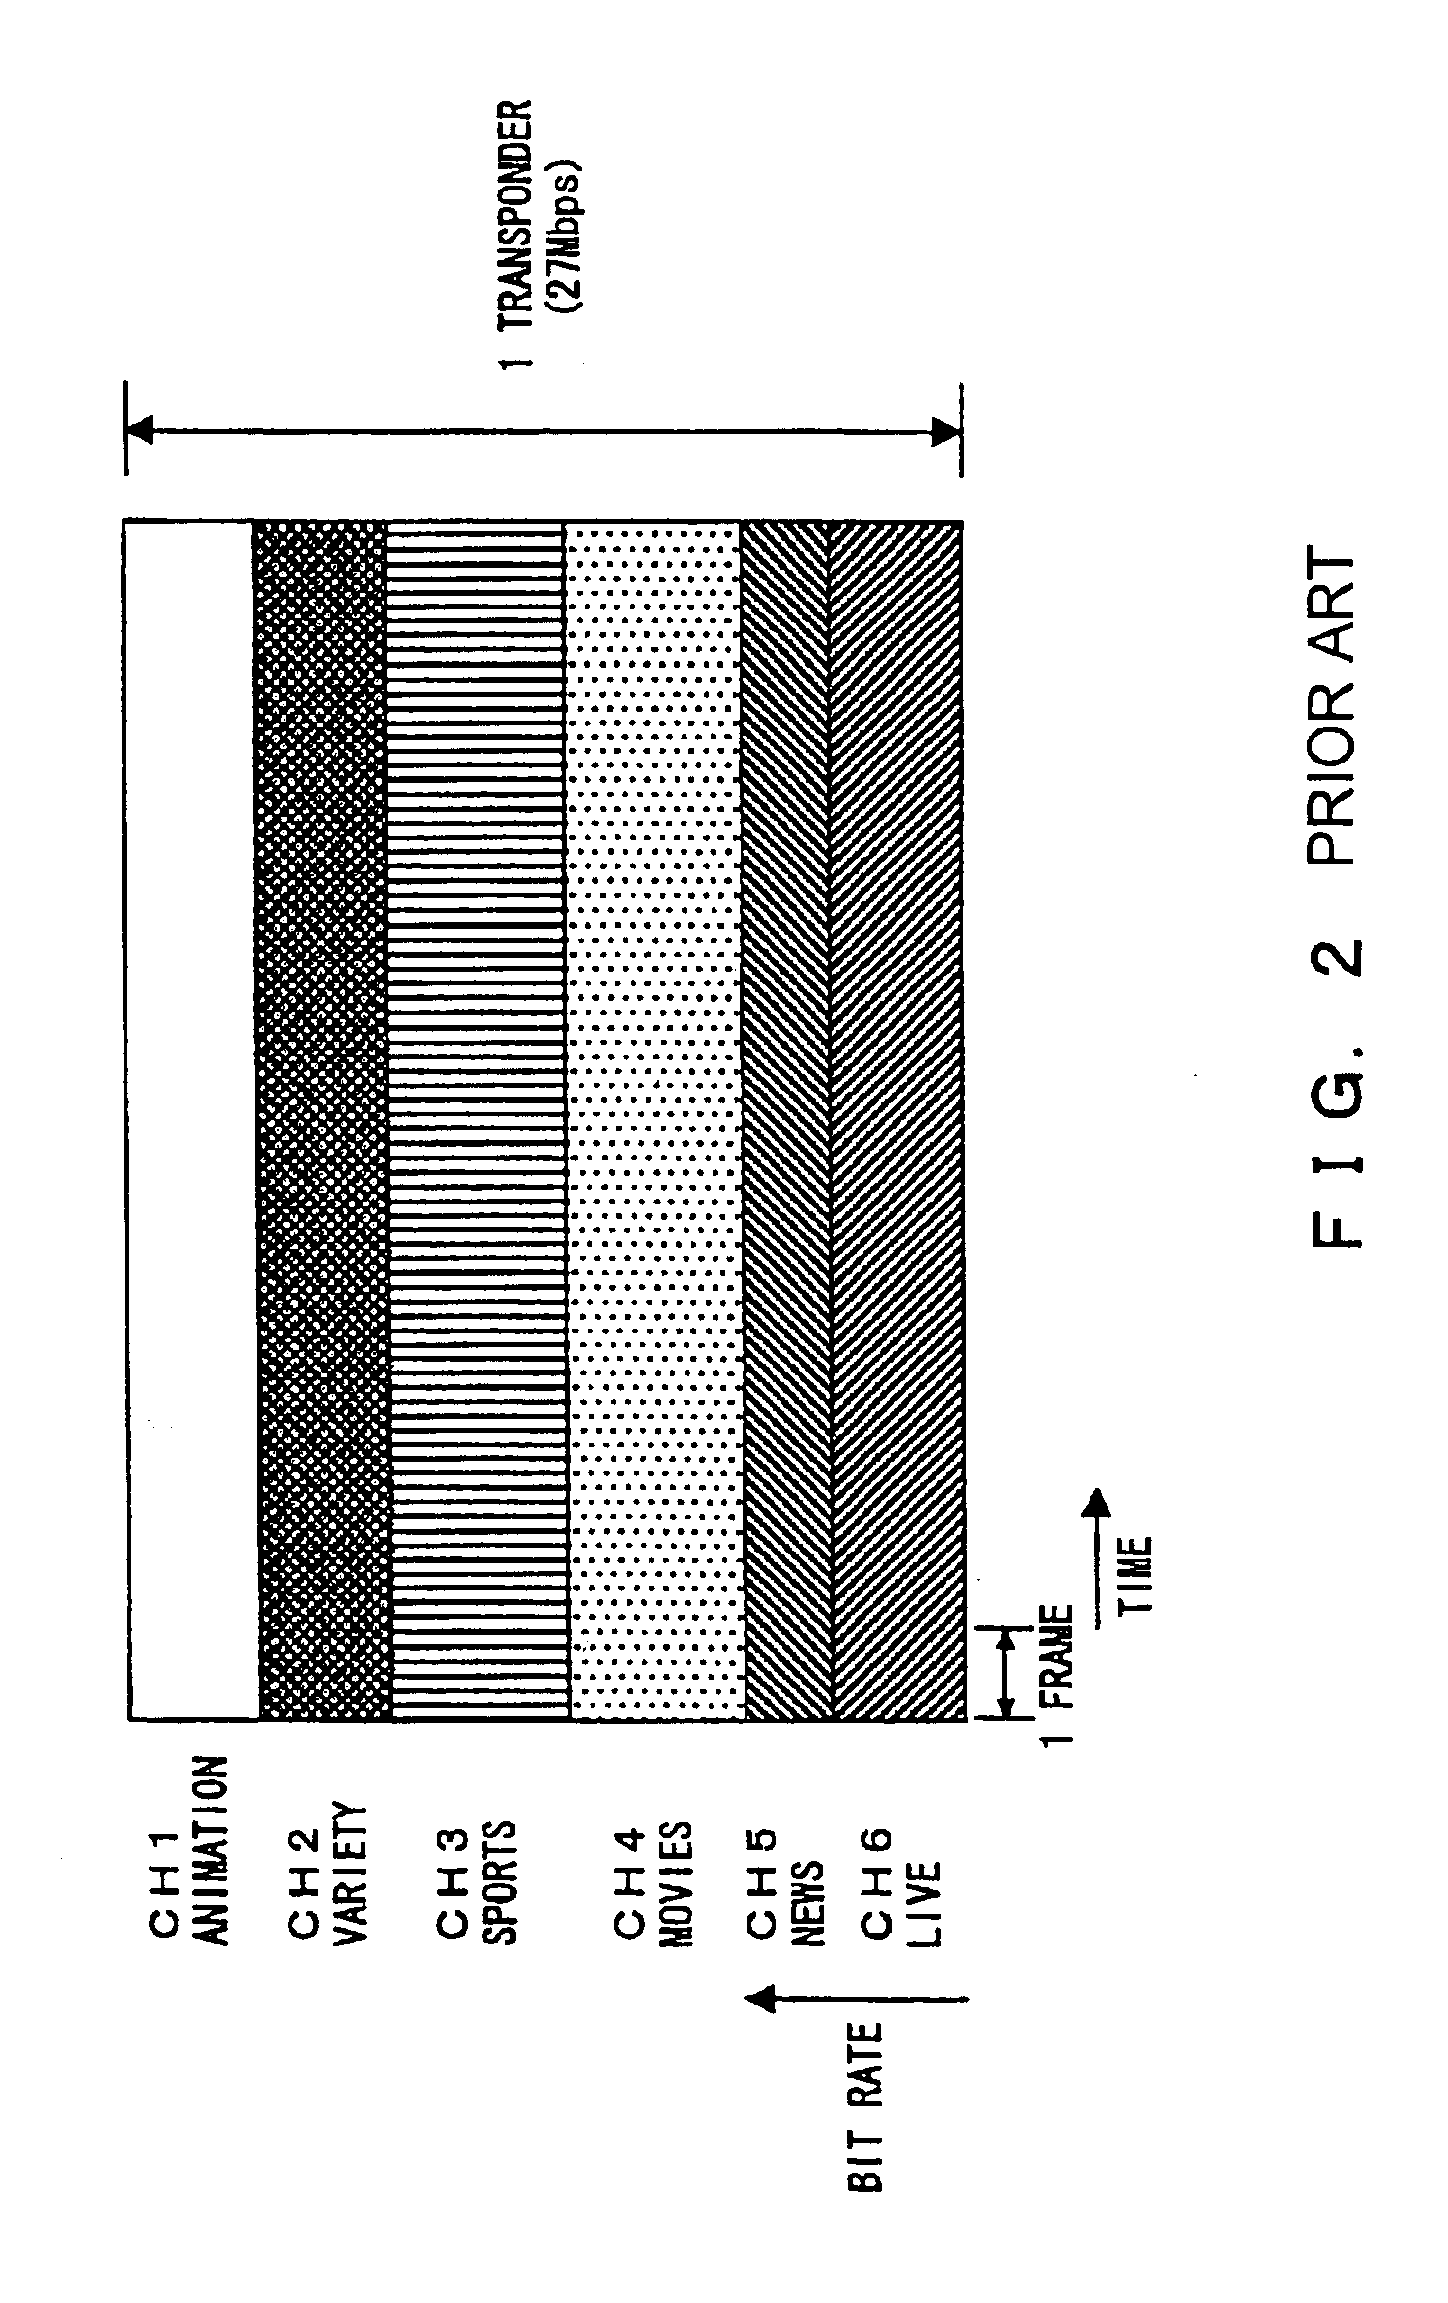 Access control apparatus and method for controlling access to storage medium